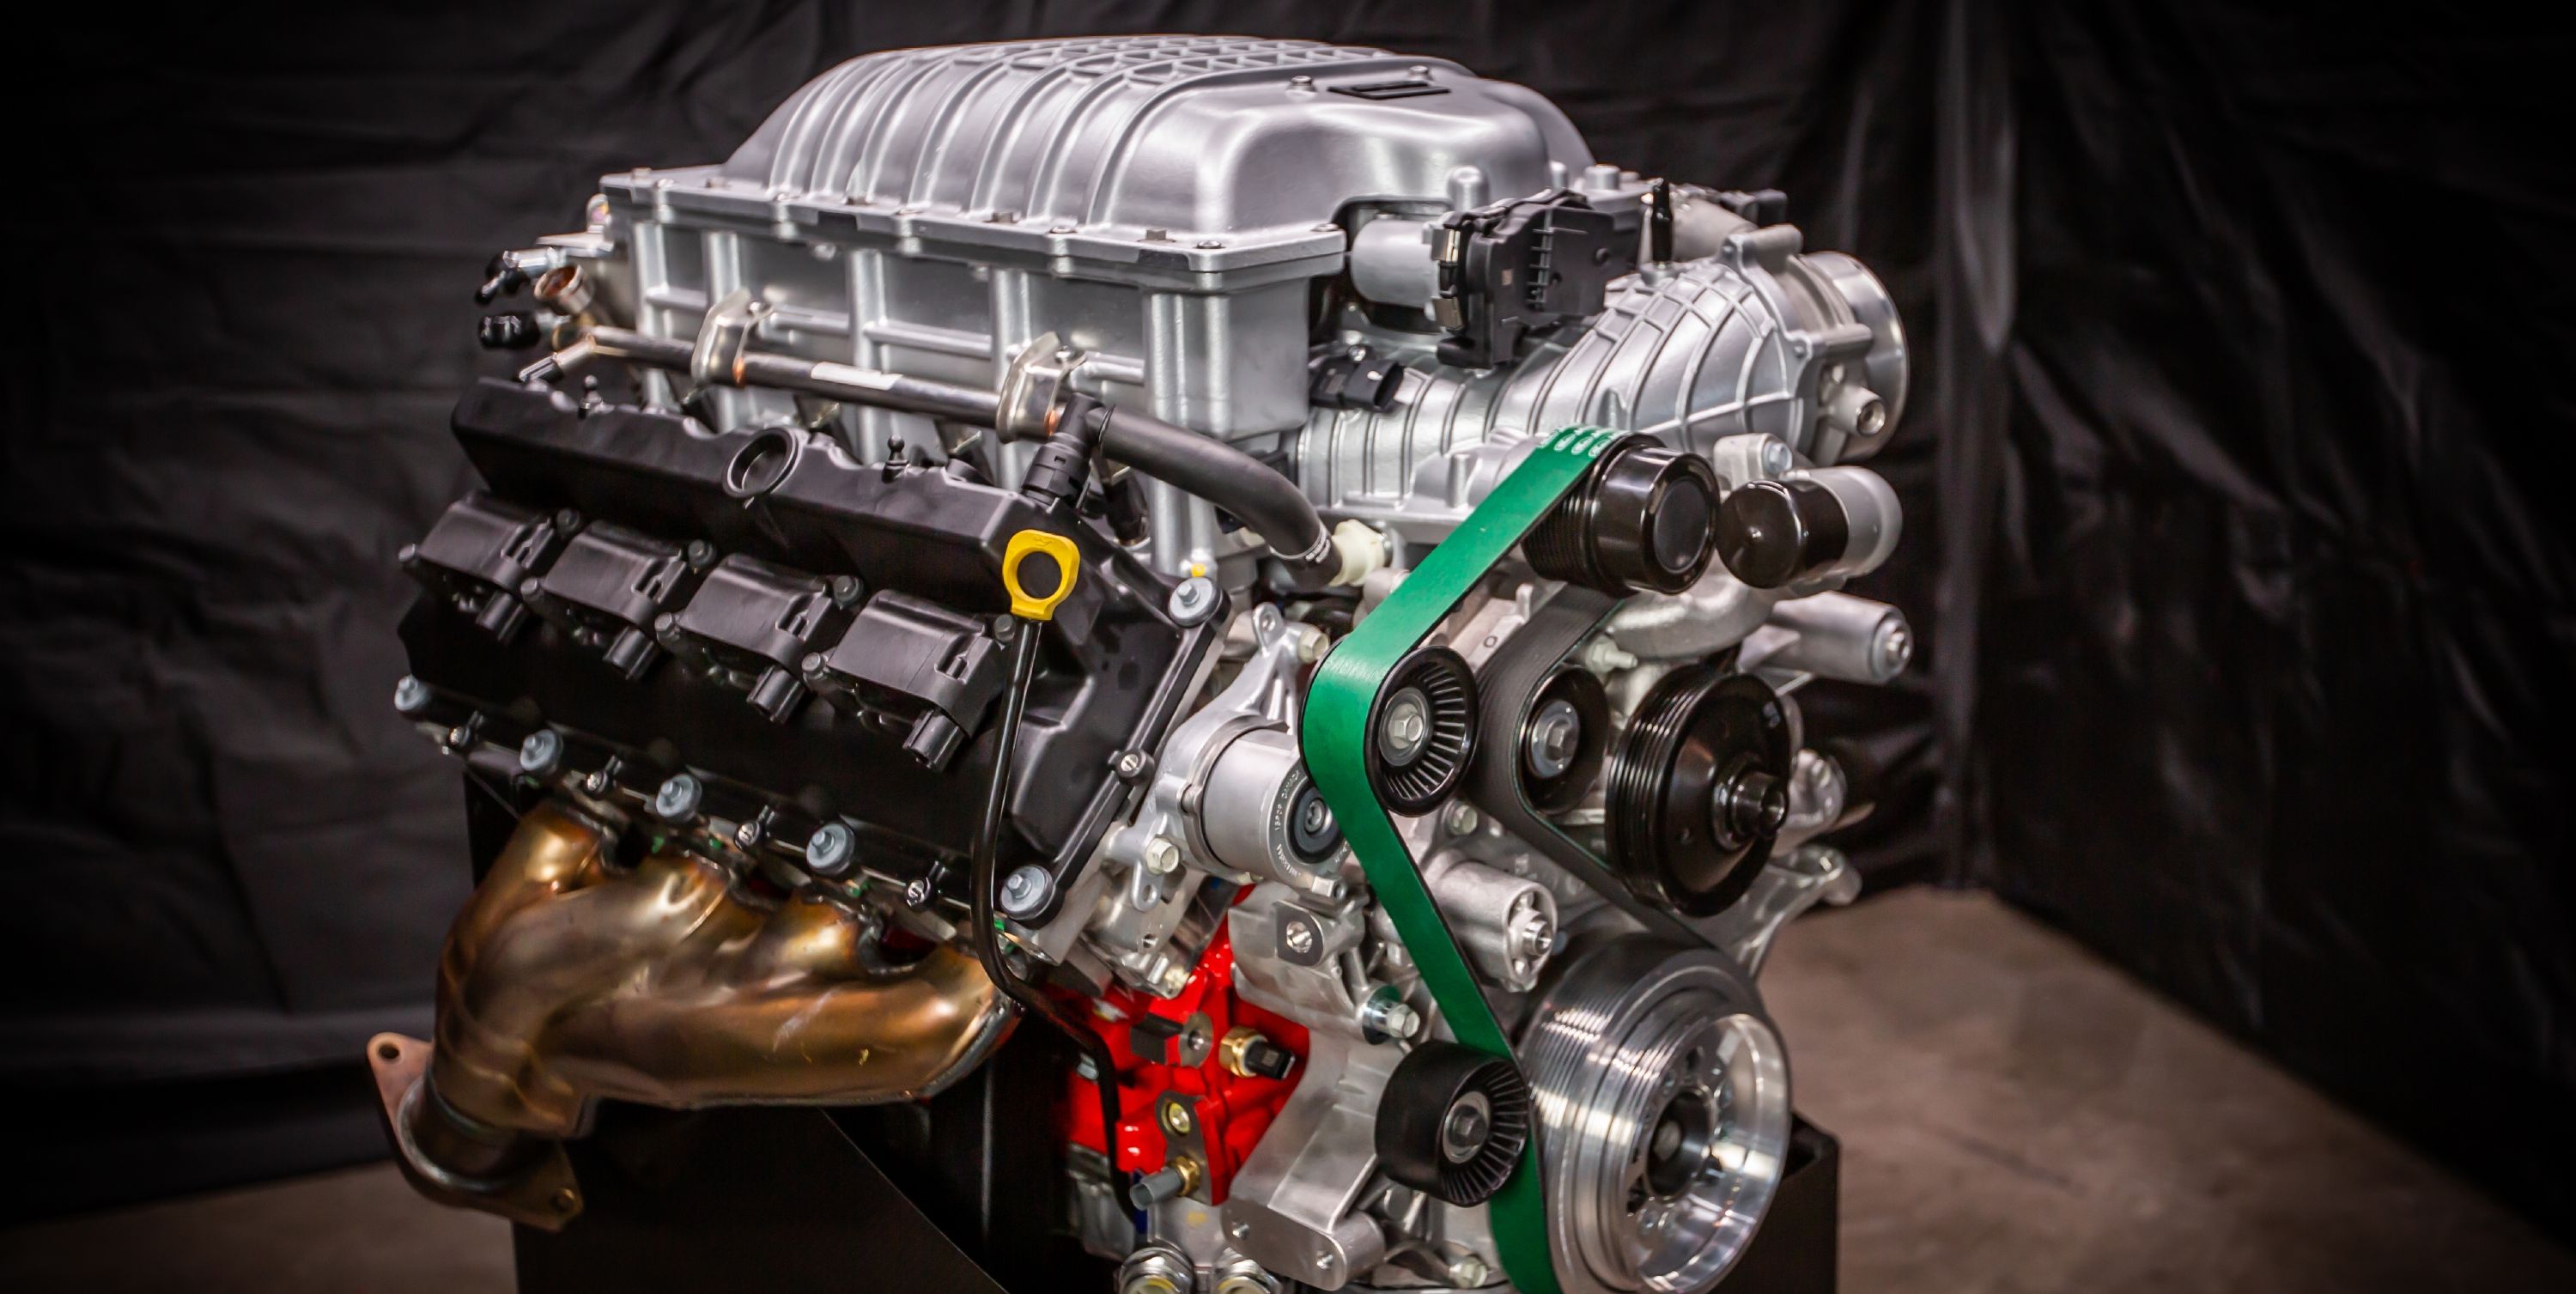 Dodge Brings New 1100-HP Hellephant Crate Engine to SEMA